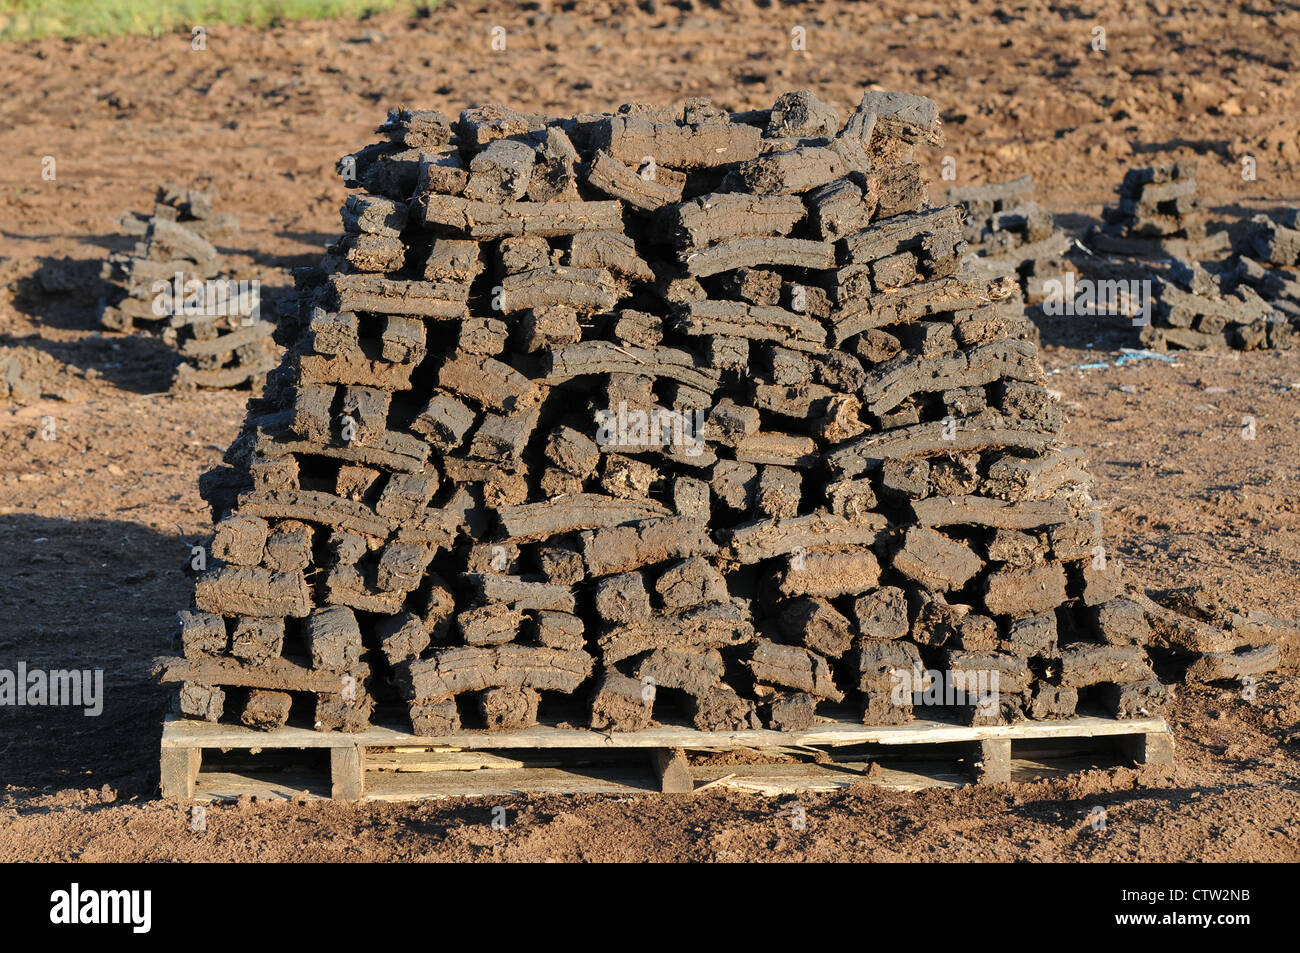 Sods of turf stacked to dry on a wooden pallet on, Emlagh Bog, Oristown, Kells, County Meath, Ireland Stock Photo